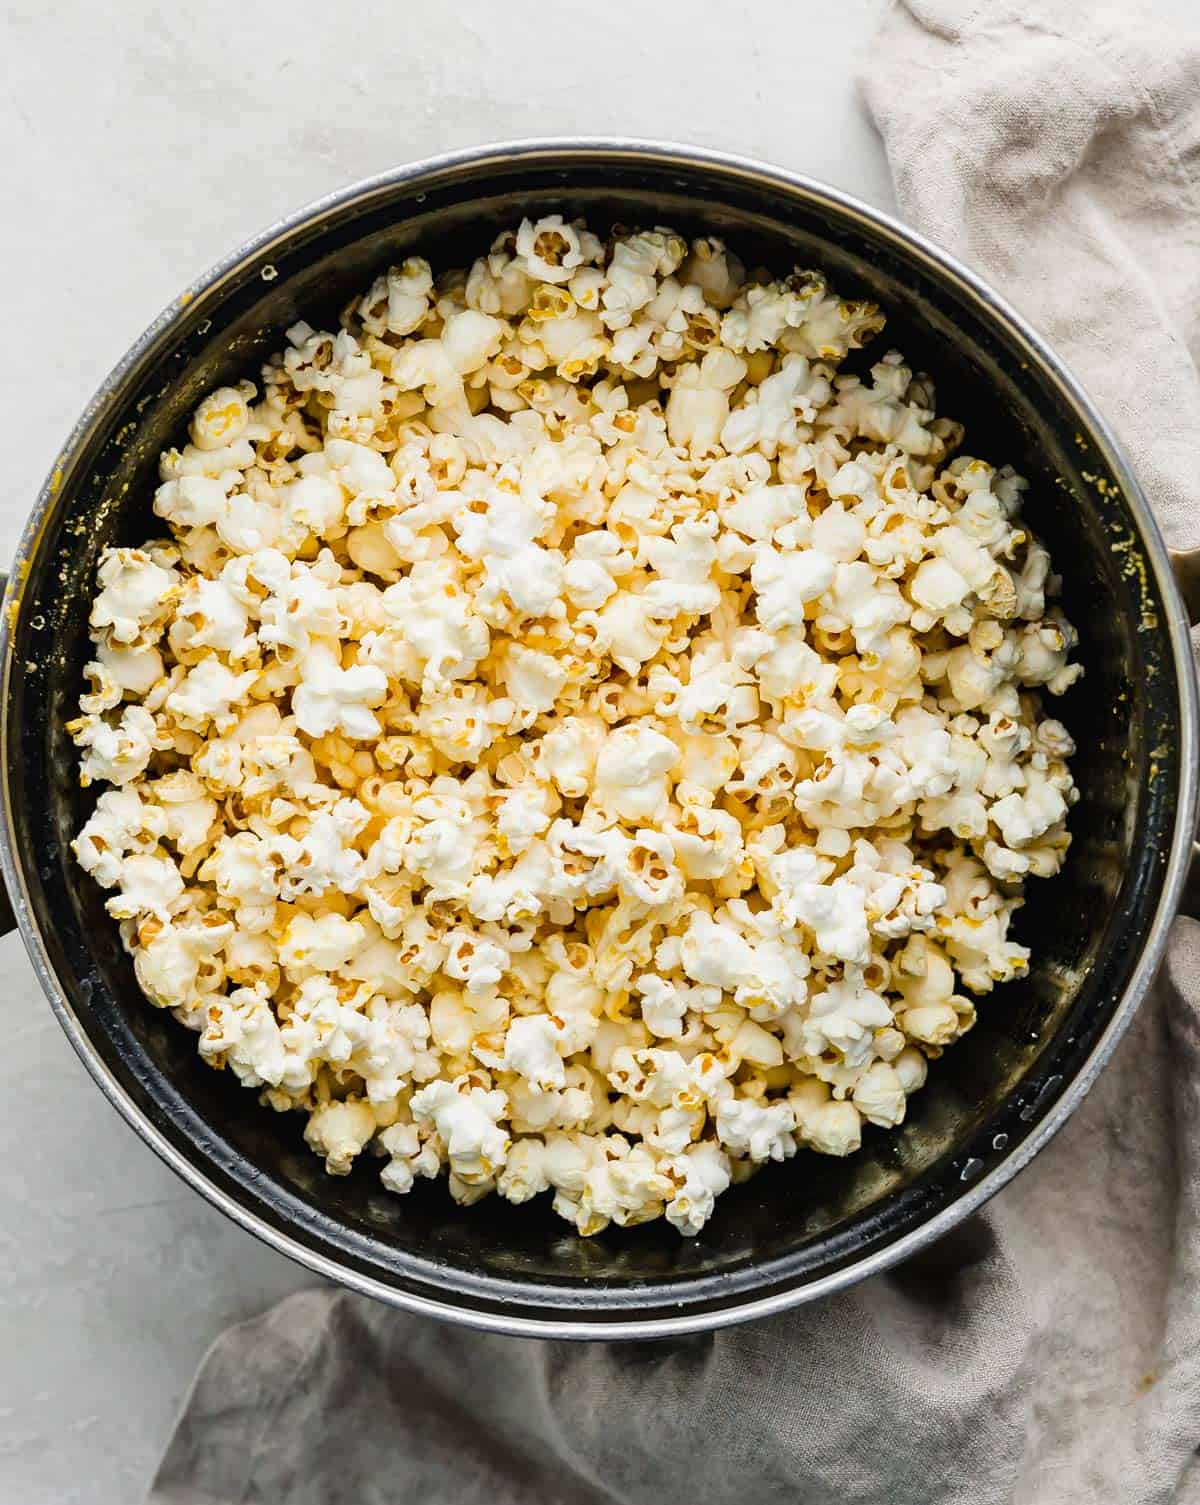 A black pot with Movie Theater Popcorn in it.